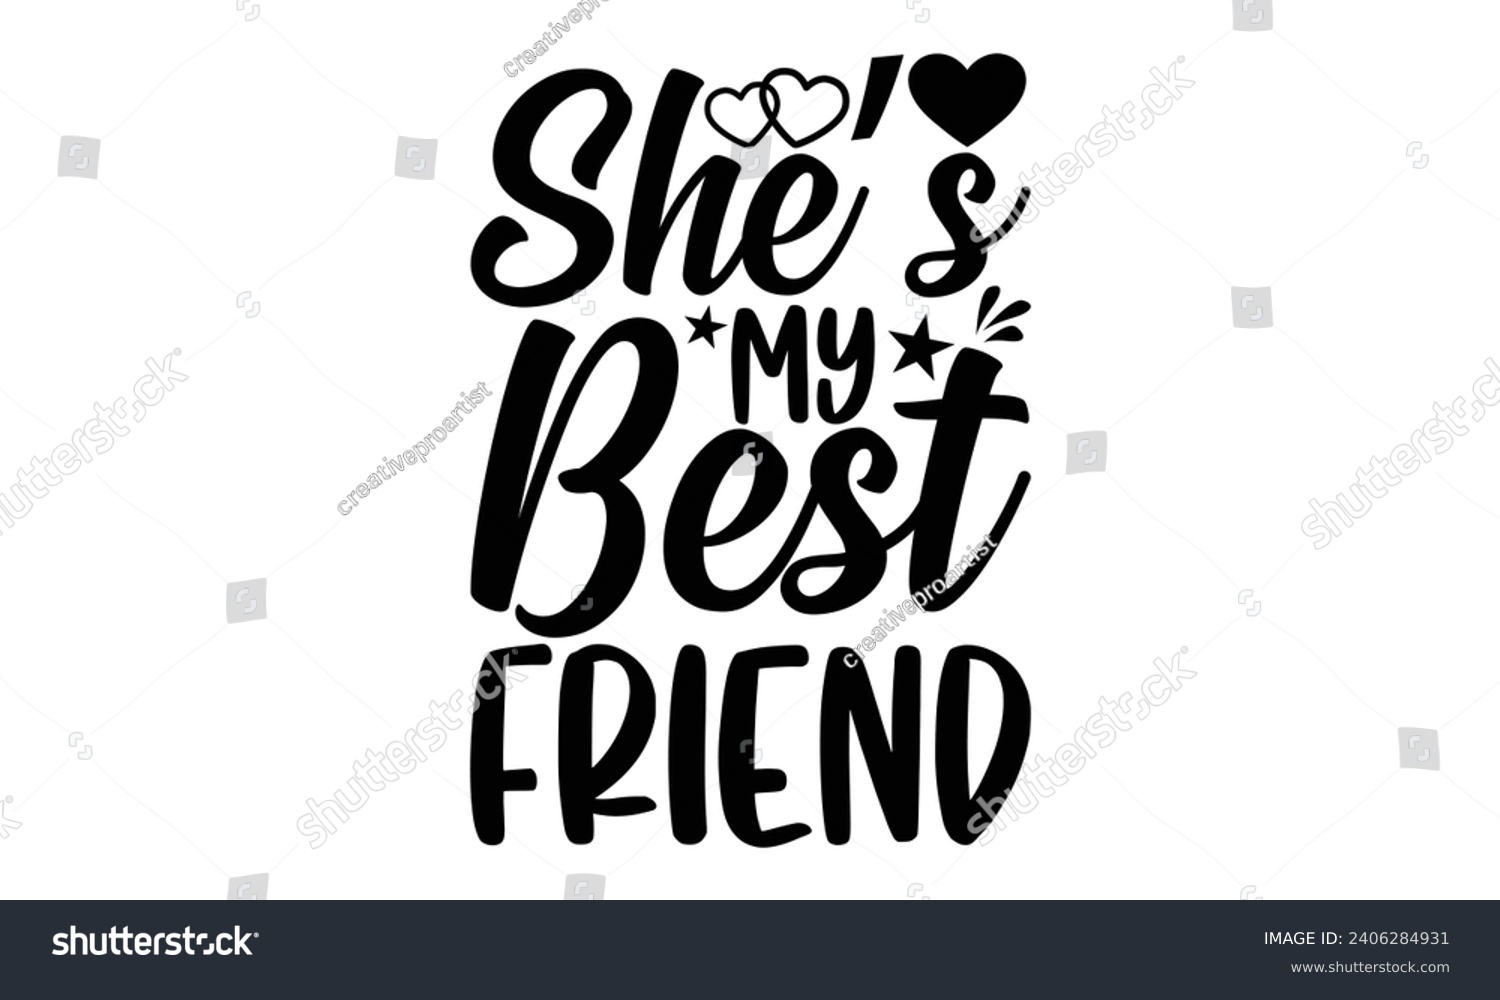 SVG of She’s My Best Friend- Best friends t- shirt design, Hand drawn lettering phrase, Illustration for prints on bags, posters, cards eps, Files for Cutting, Isolated on white background. svg